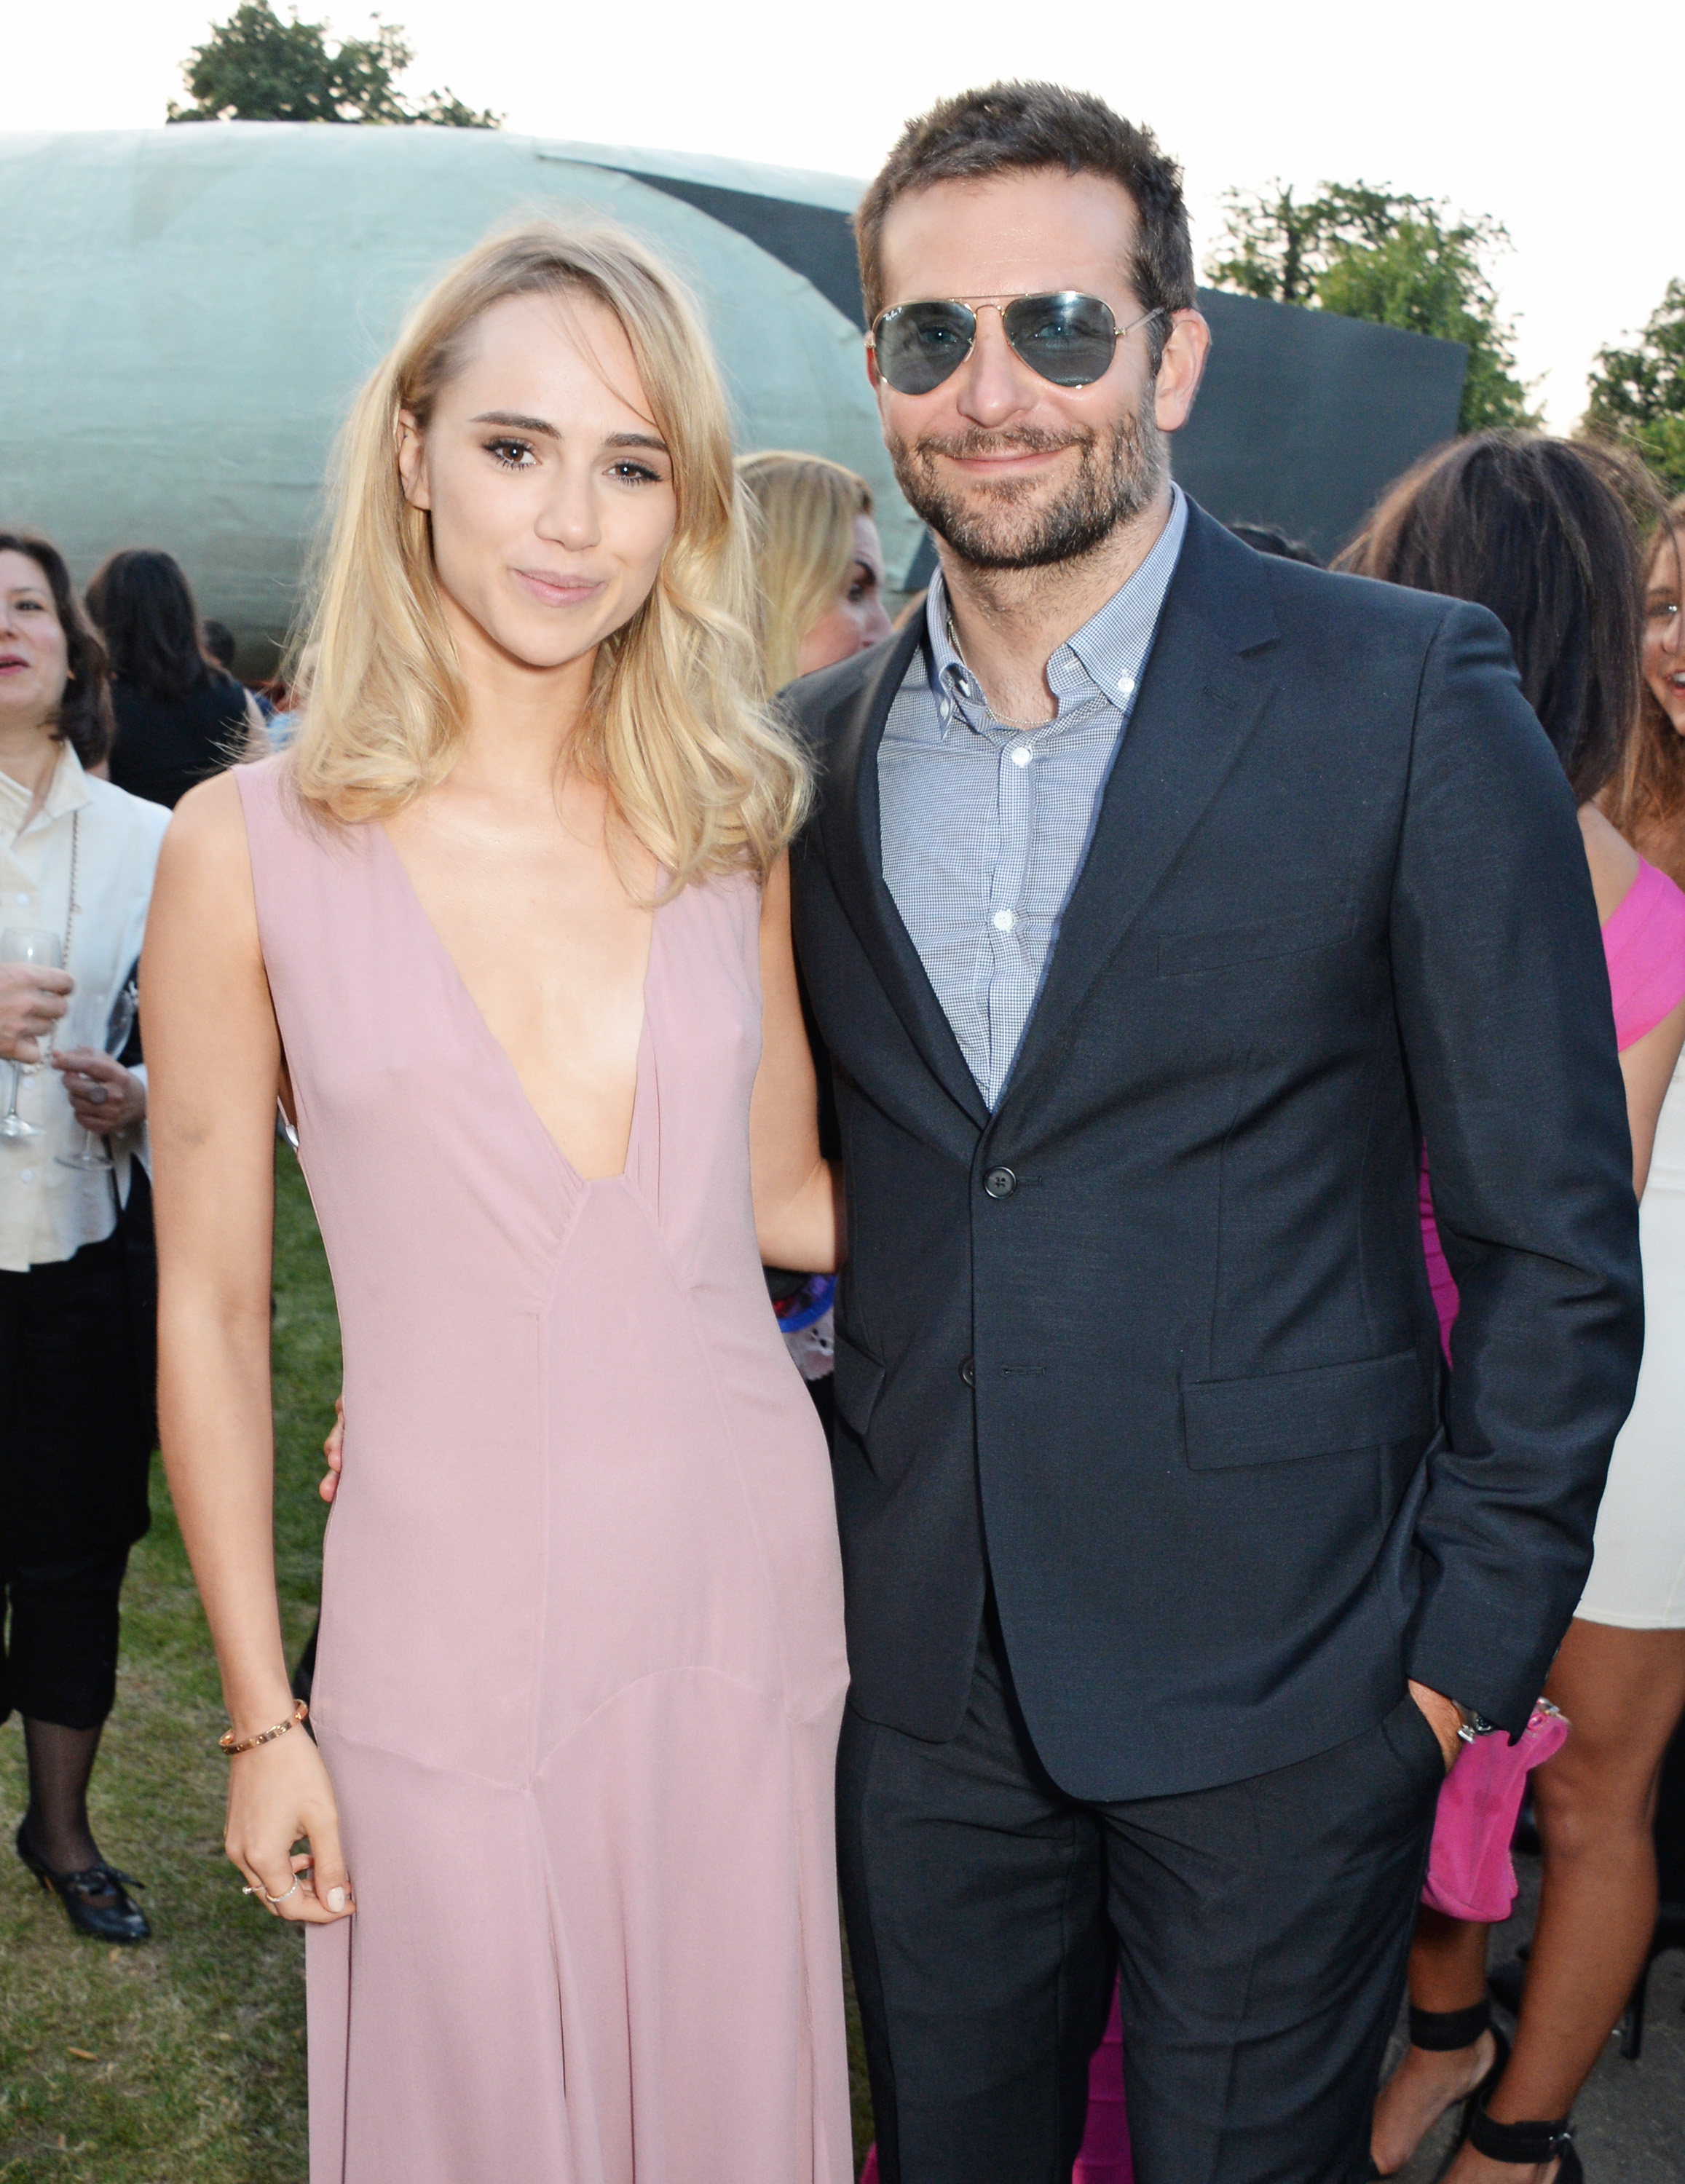 Suki Waterhouse and Bradley Cooper at The Serpentine Gallery Summer Party co-hosted by Brioni at The Serpentine Gallery in 2014